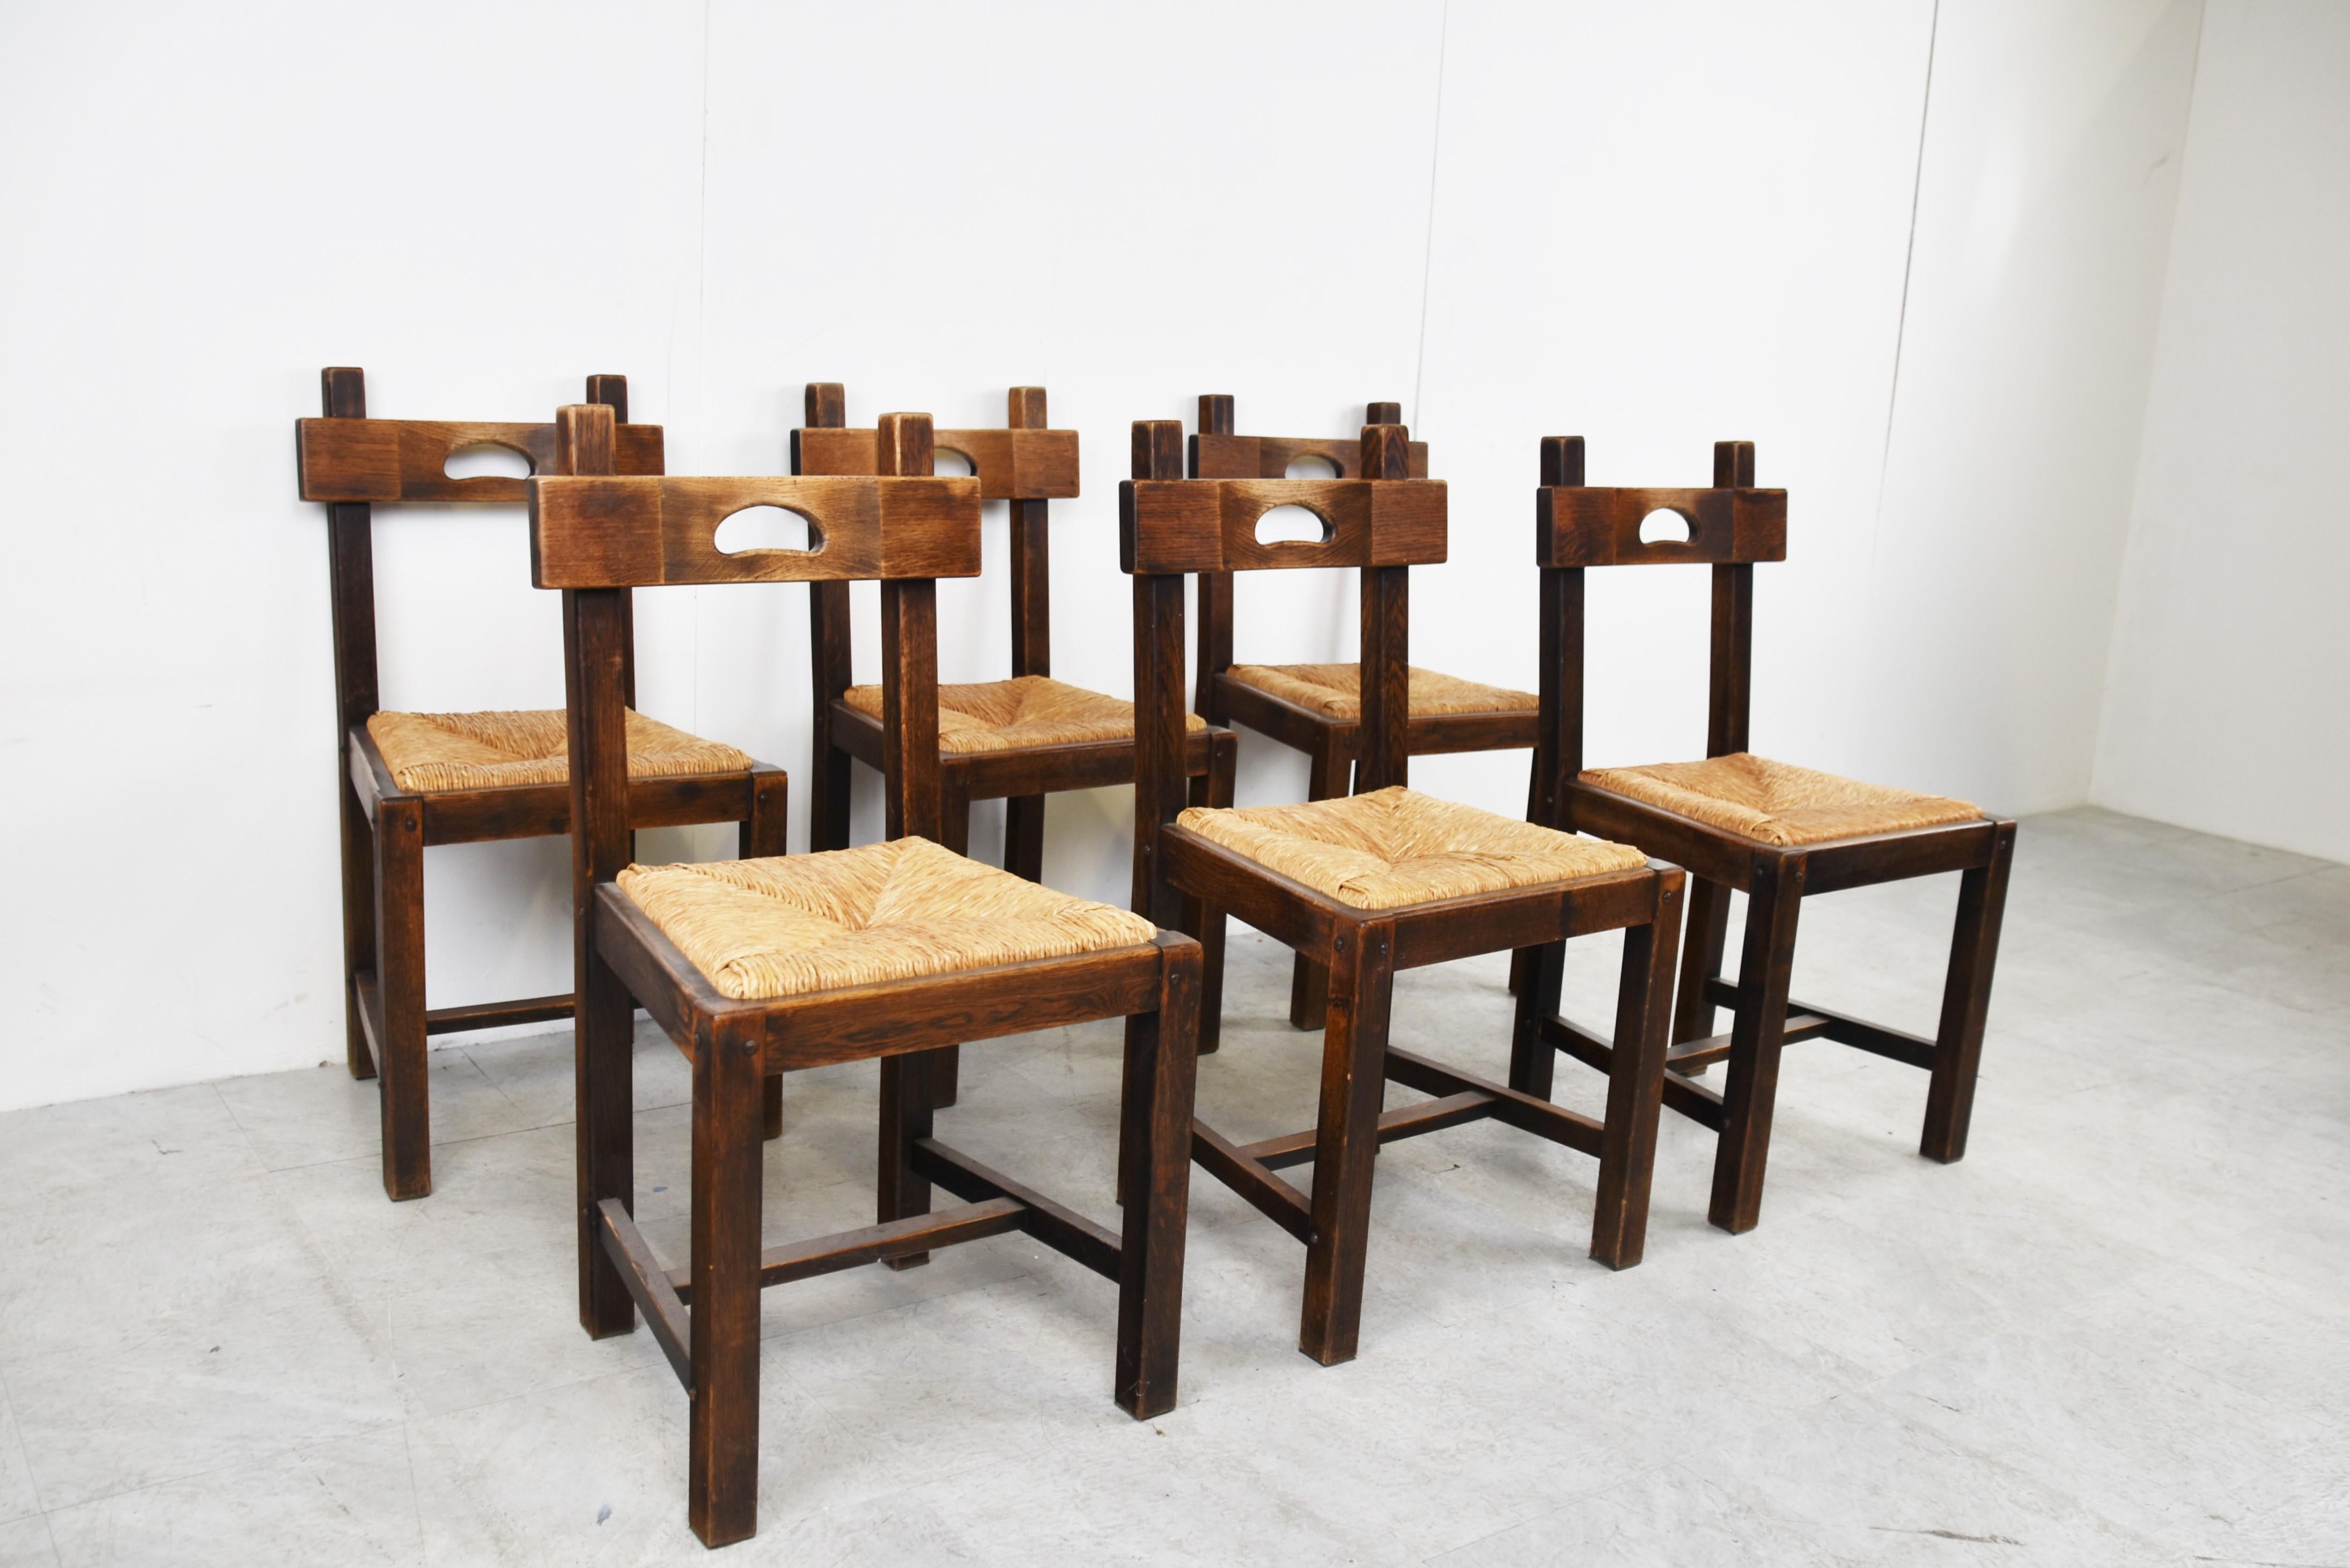 Mid-20th Century Vintage Oak and Wicker Brutalist Chairs, 1960s